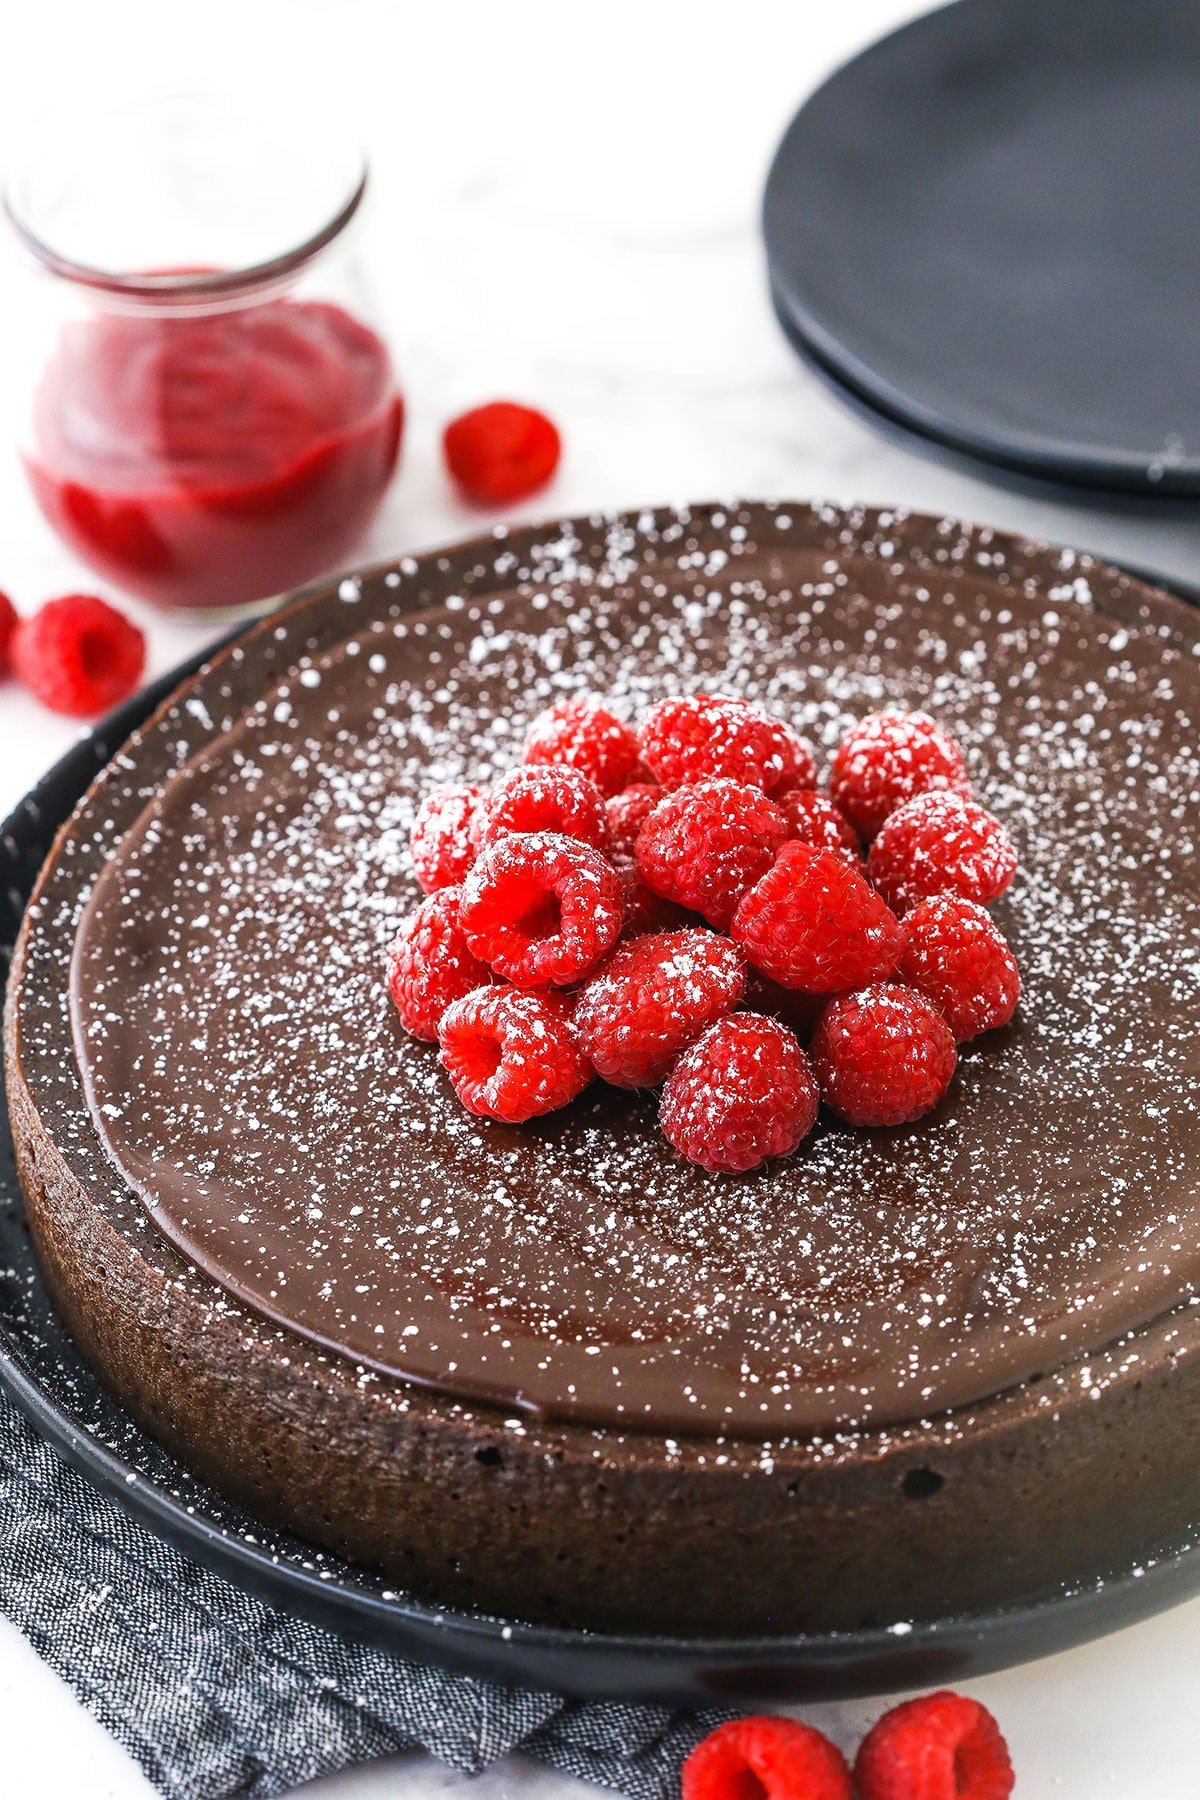 A flourless chocolate torte topped with a dusting of powdered sugar, raspberry sauce and fresh berries